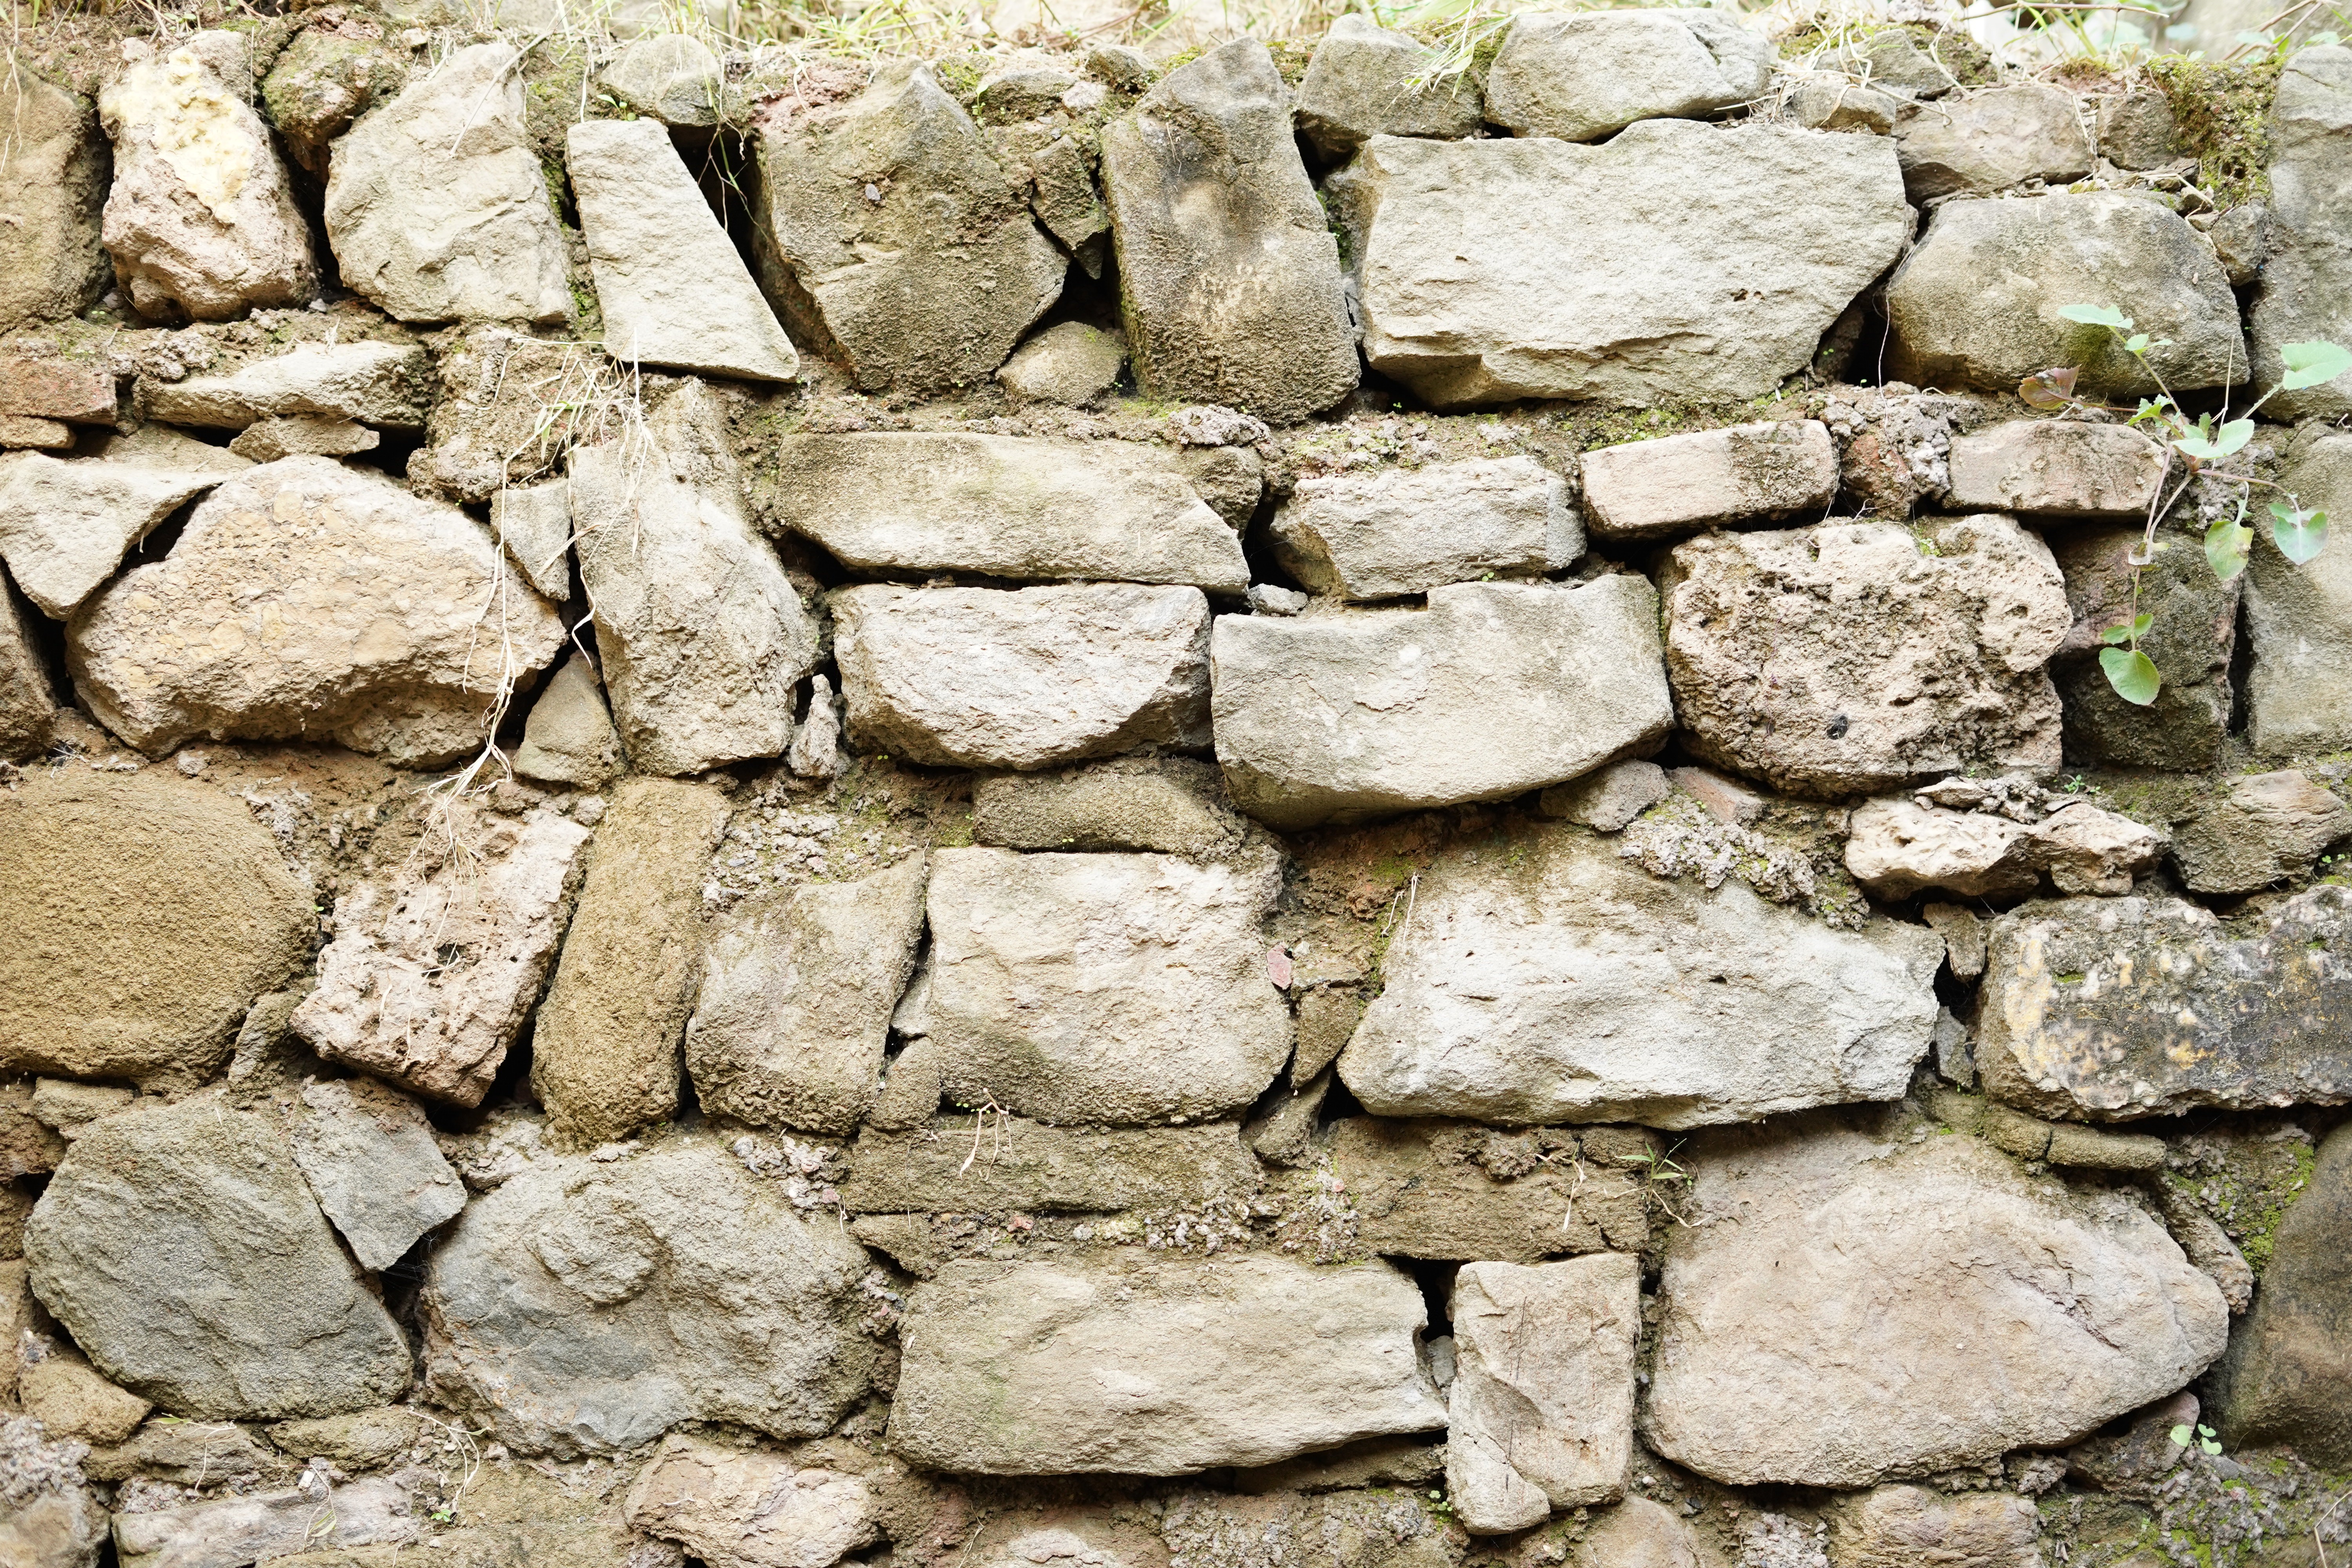 The condition of bearing stone wall constructed in the ancient times